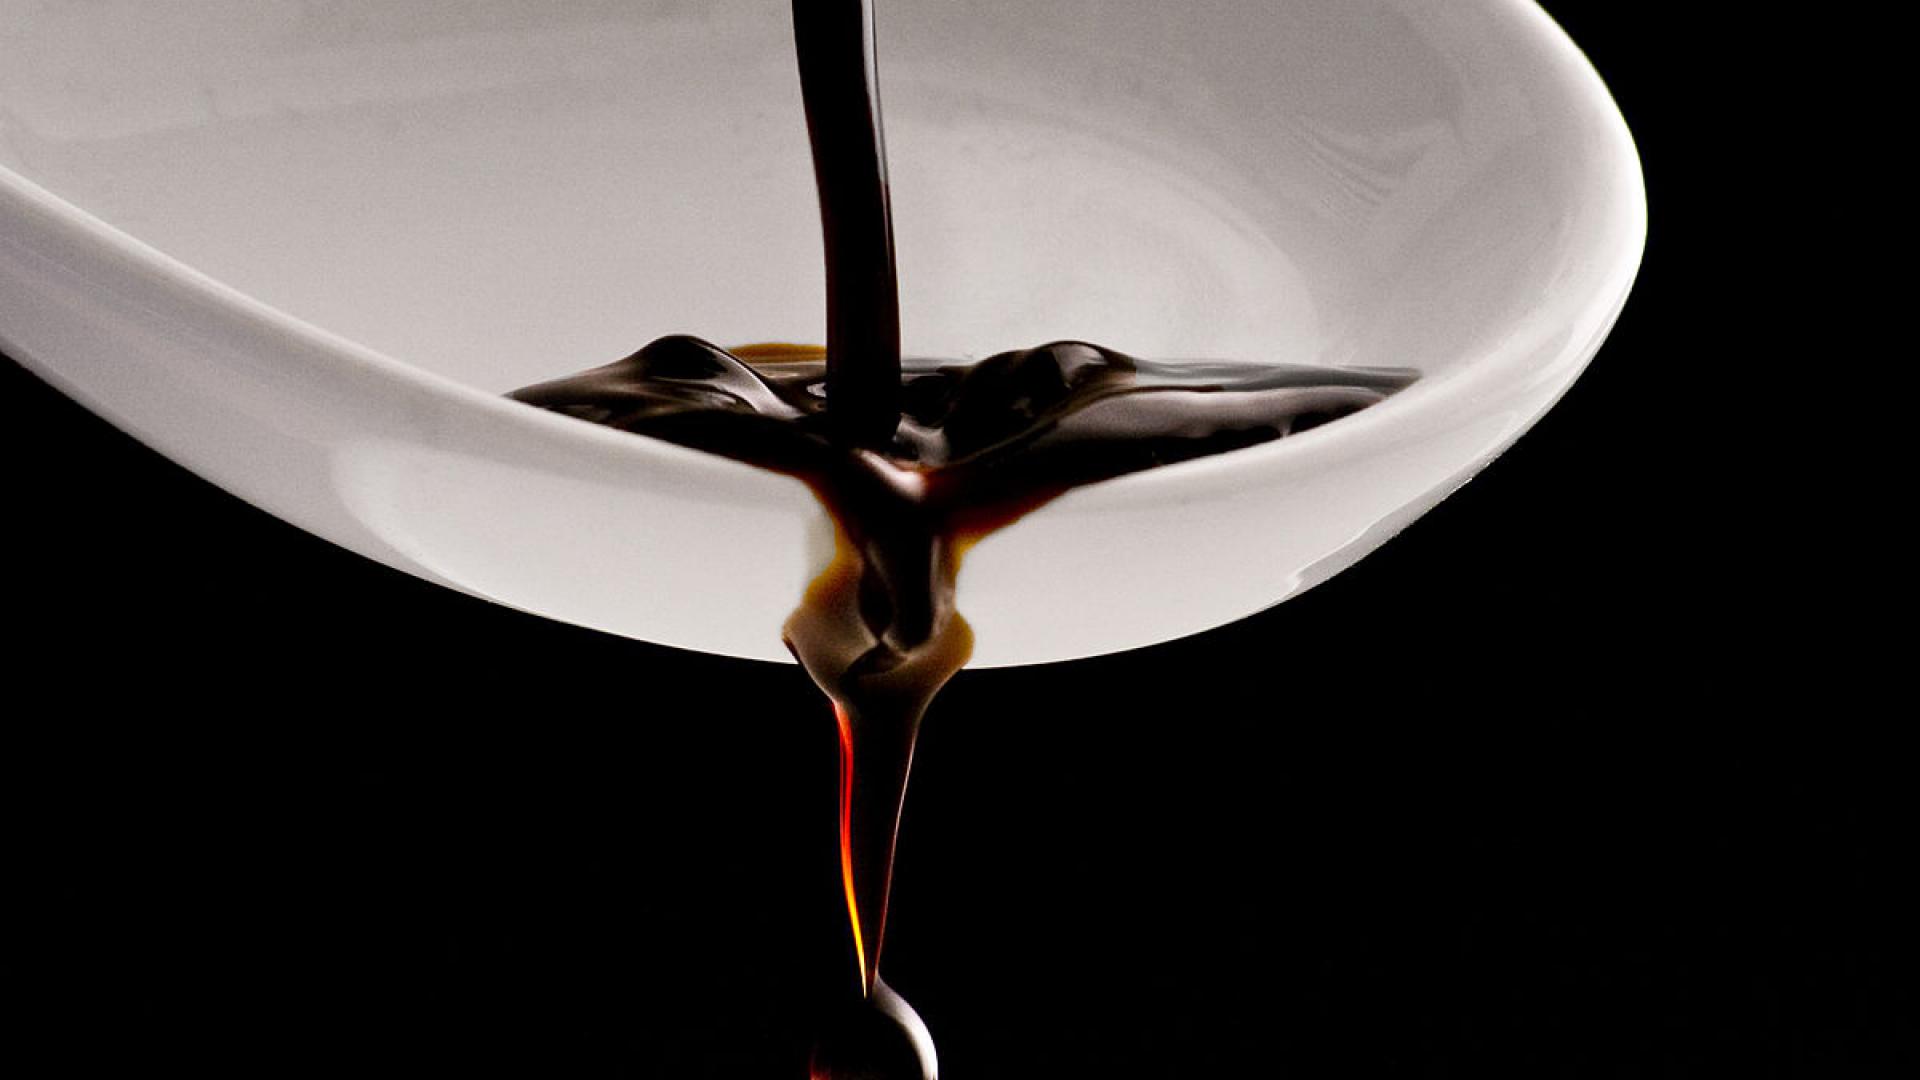 Your Culinary Creations Buy italy balsamic vinegar and Italian Mustard Online - PenCraftedNews